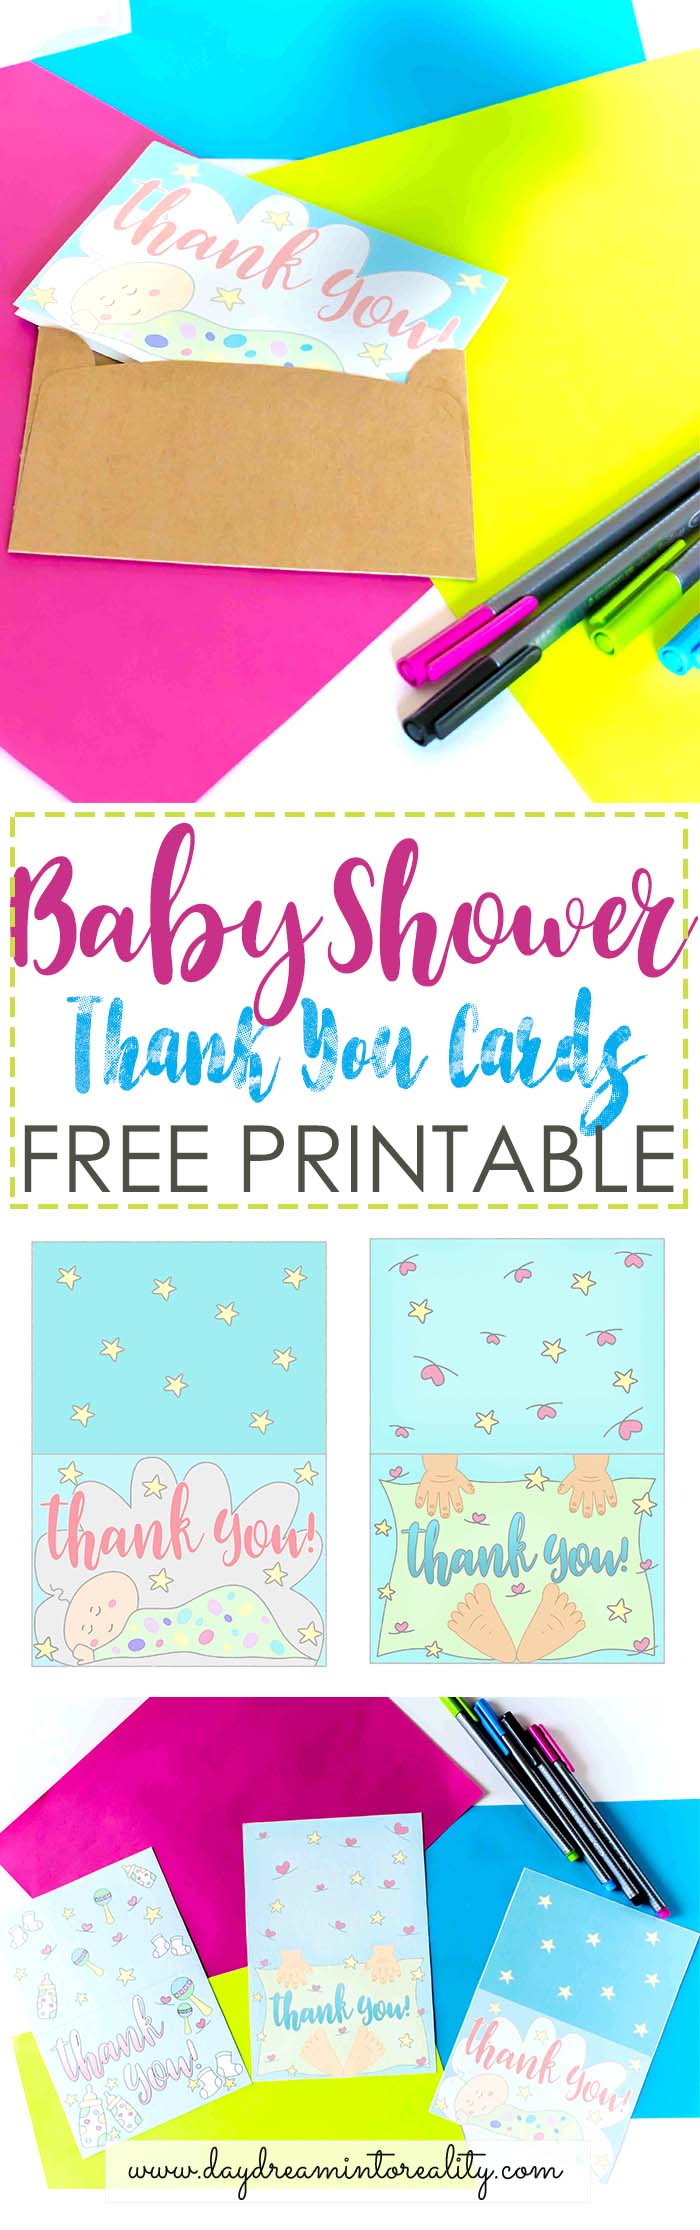 Baby Shower Thank You Cards Free Printable ~ Daydream Into Reality - Free Printable Baby Shower Thank You Cards